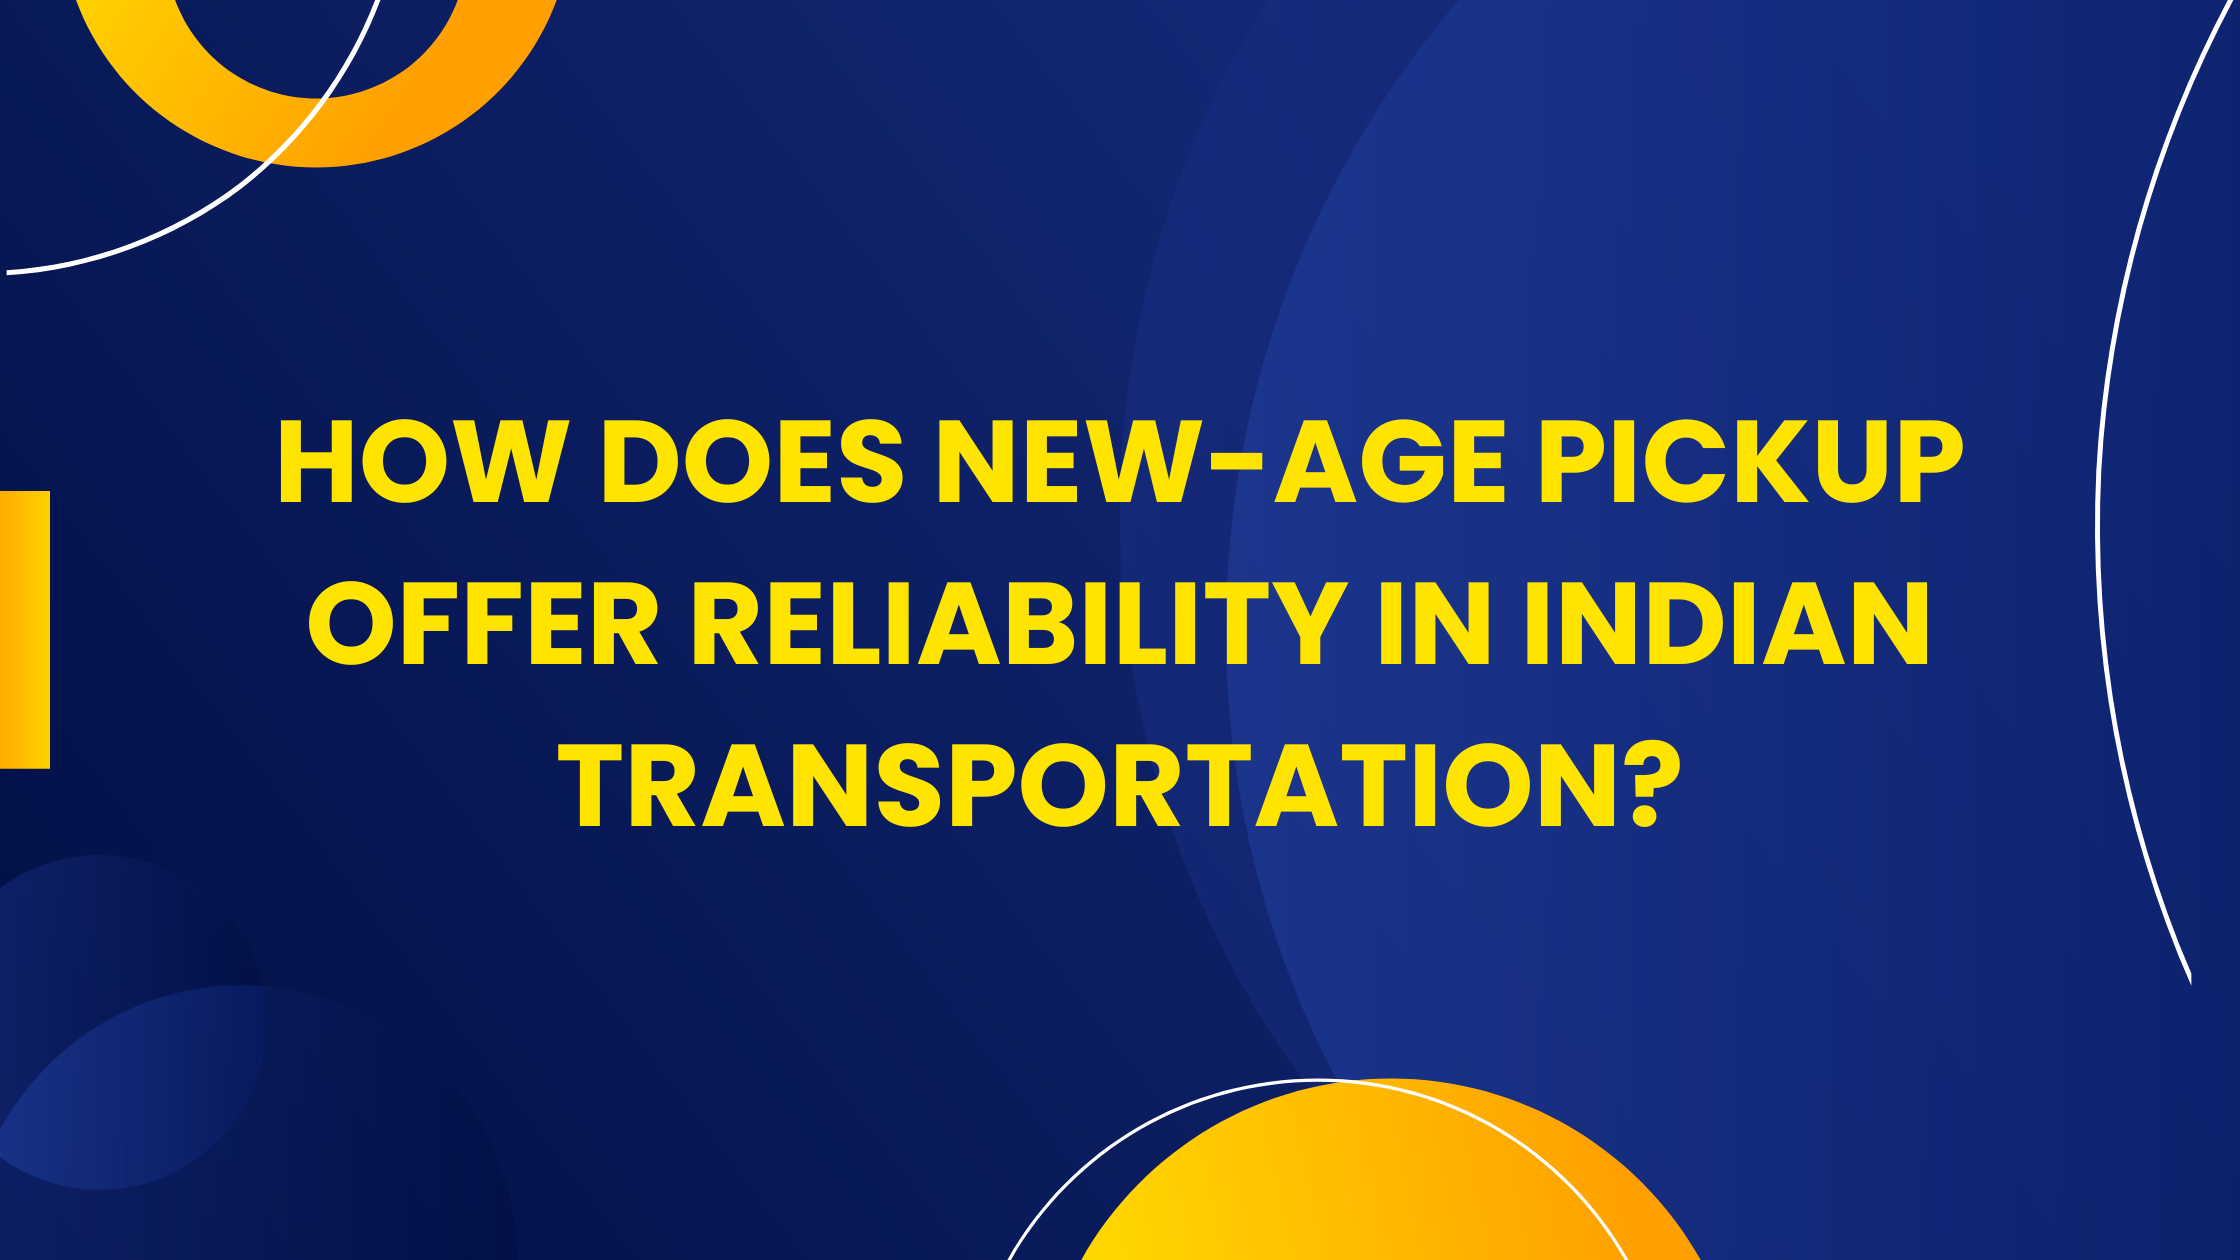 How Does New-Age Pickup Offer Reliability in Indian Transportation